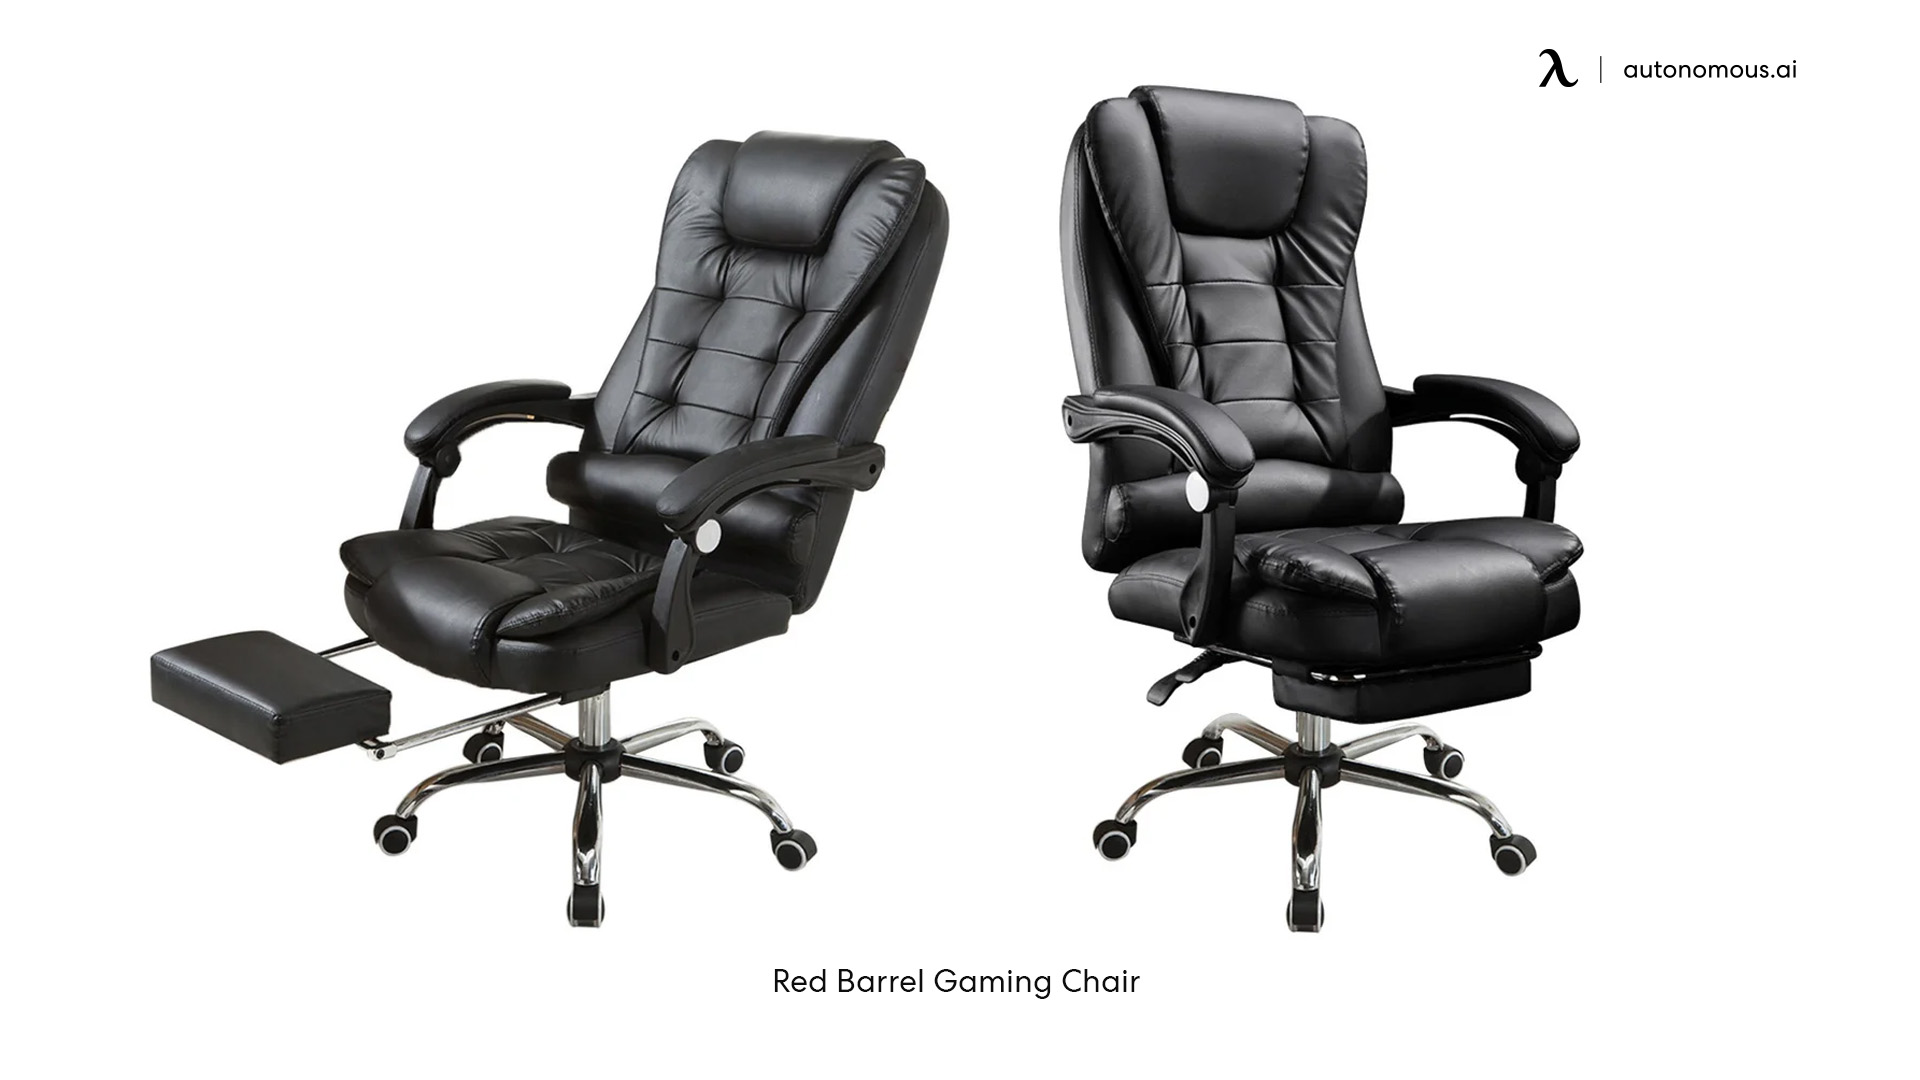 Red Barrel Gaming Chair